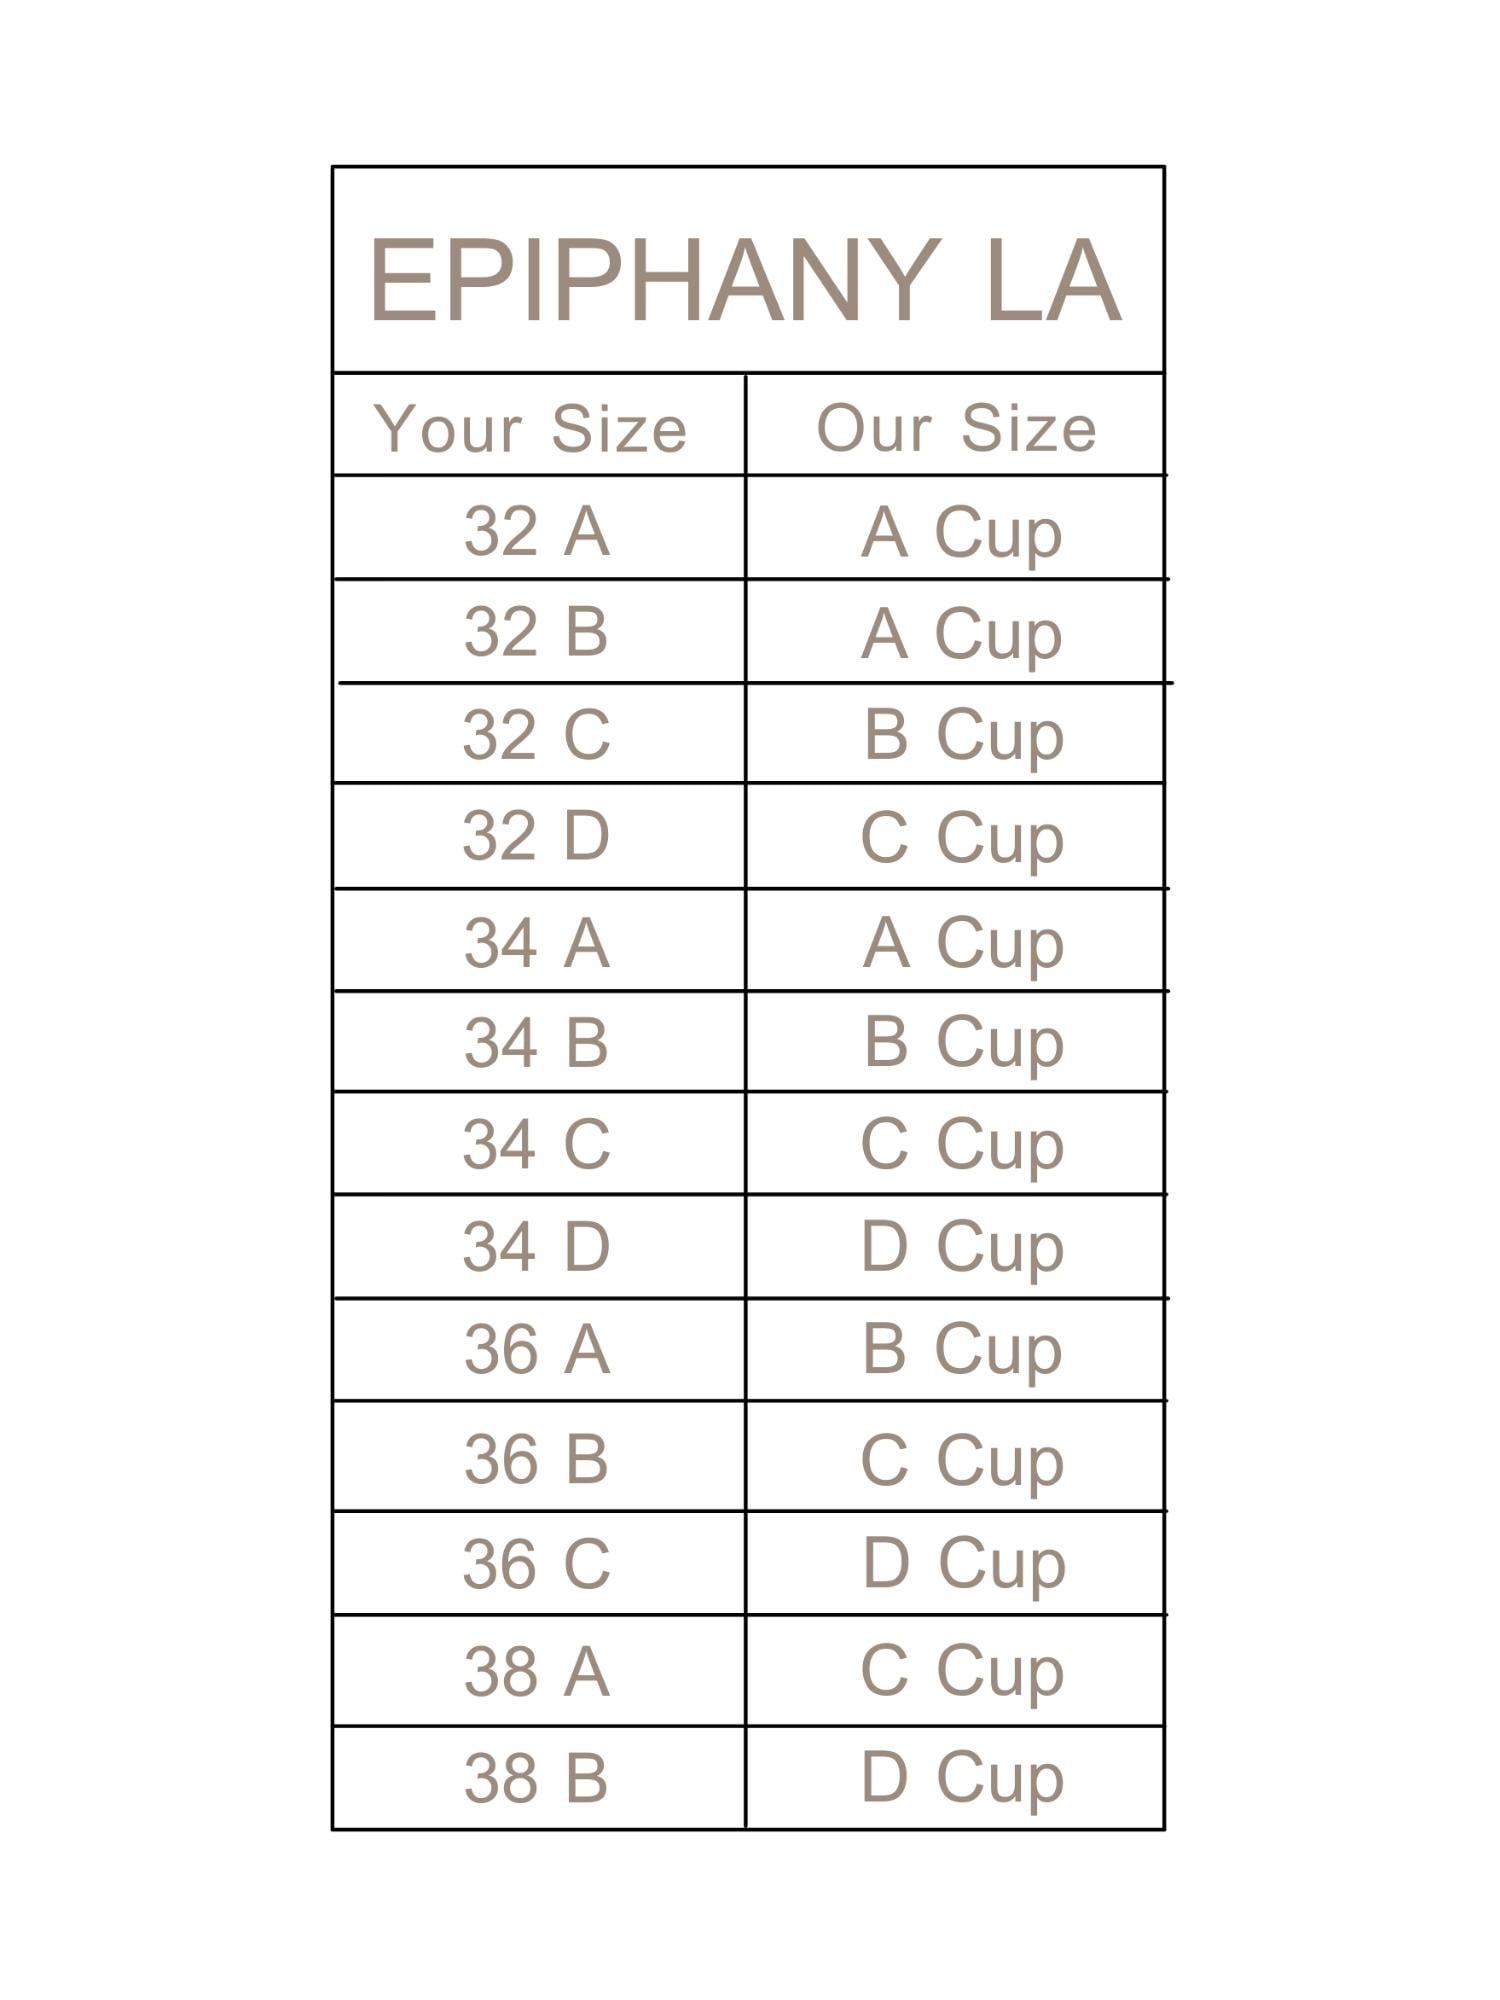 Epiphany LA Women's Push Up Padding Inserts for Swimsuits, Sports Bras &  Tops - 1 Set, A Cup 